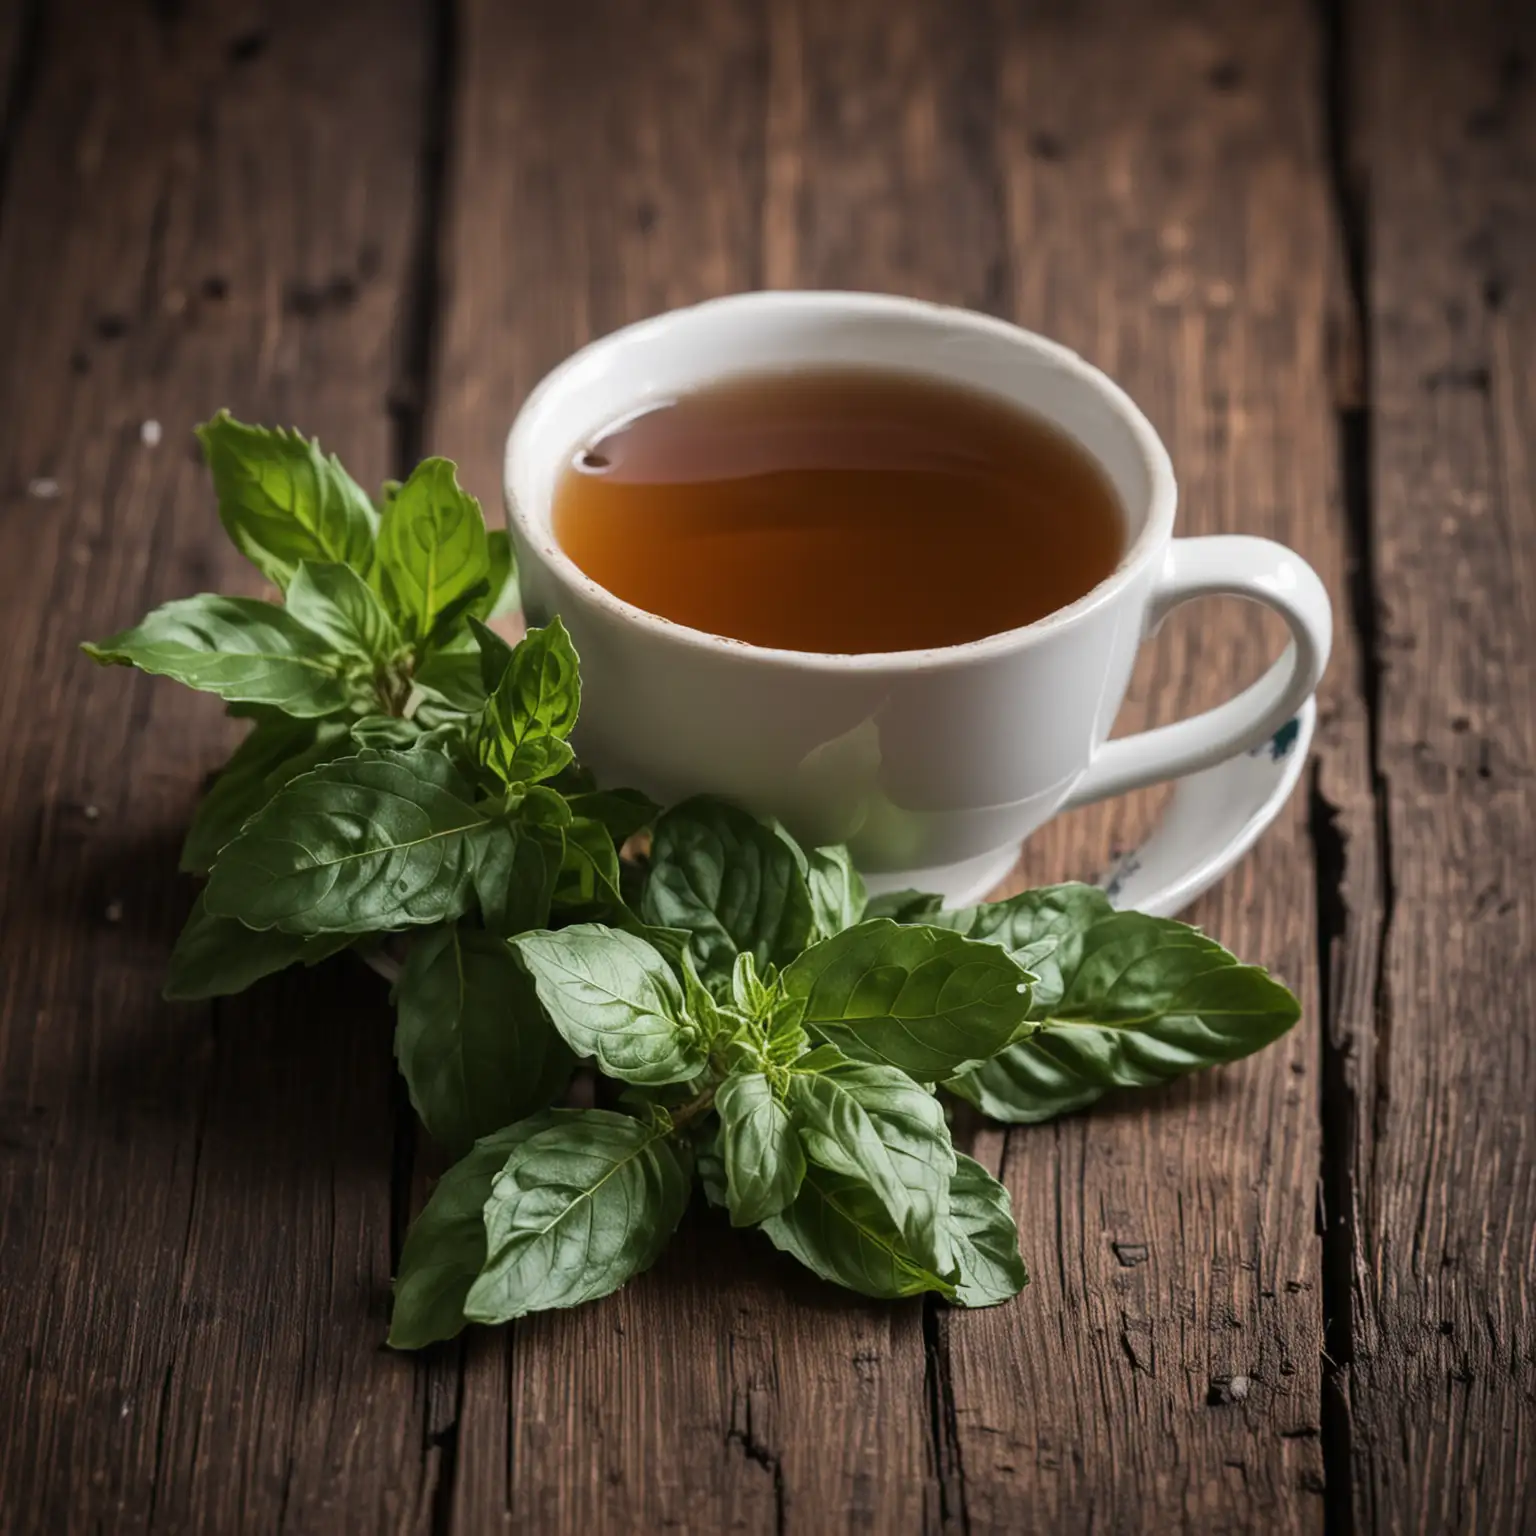 Holy Basil plant with a cup of tea on dark wooden table with selective focus